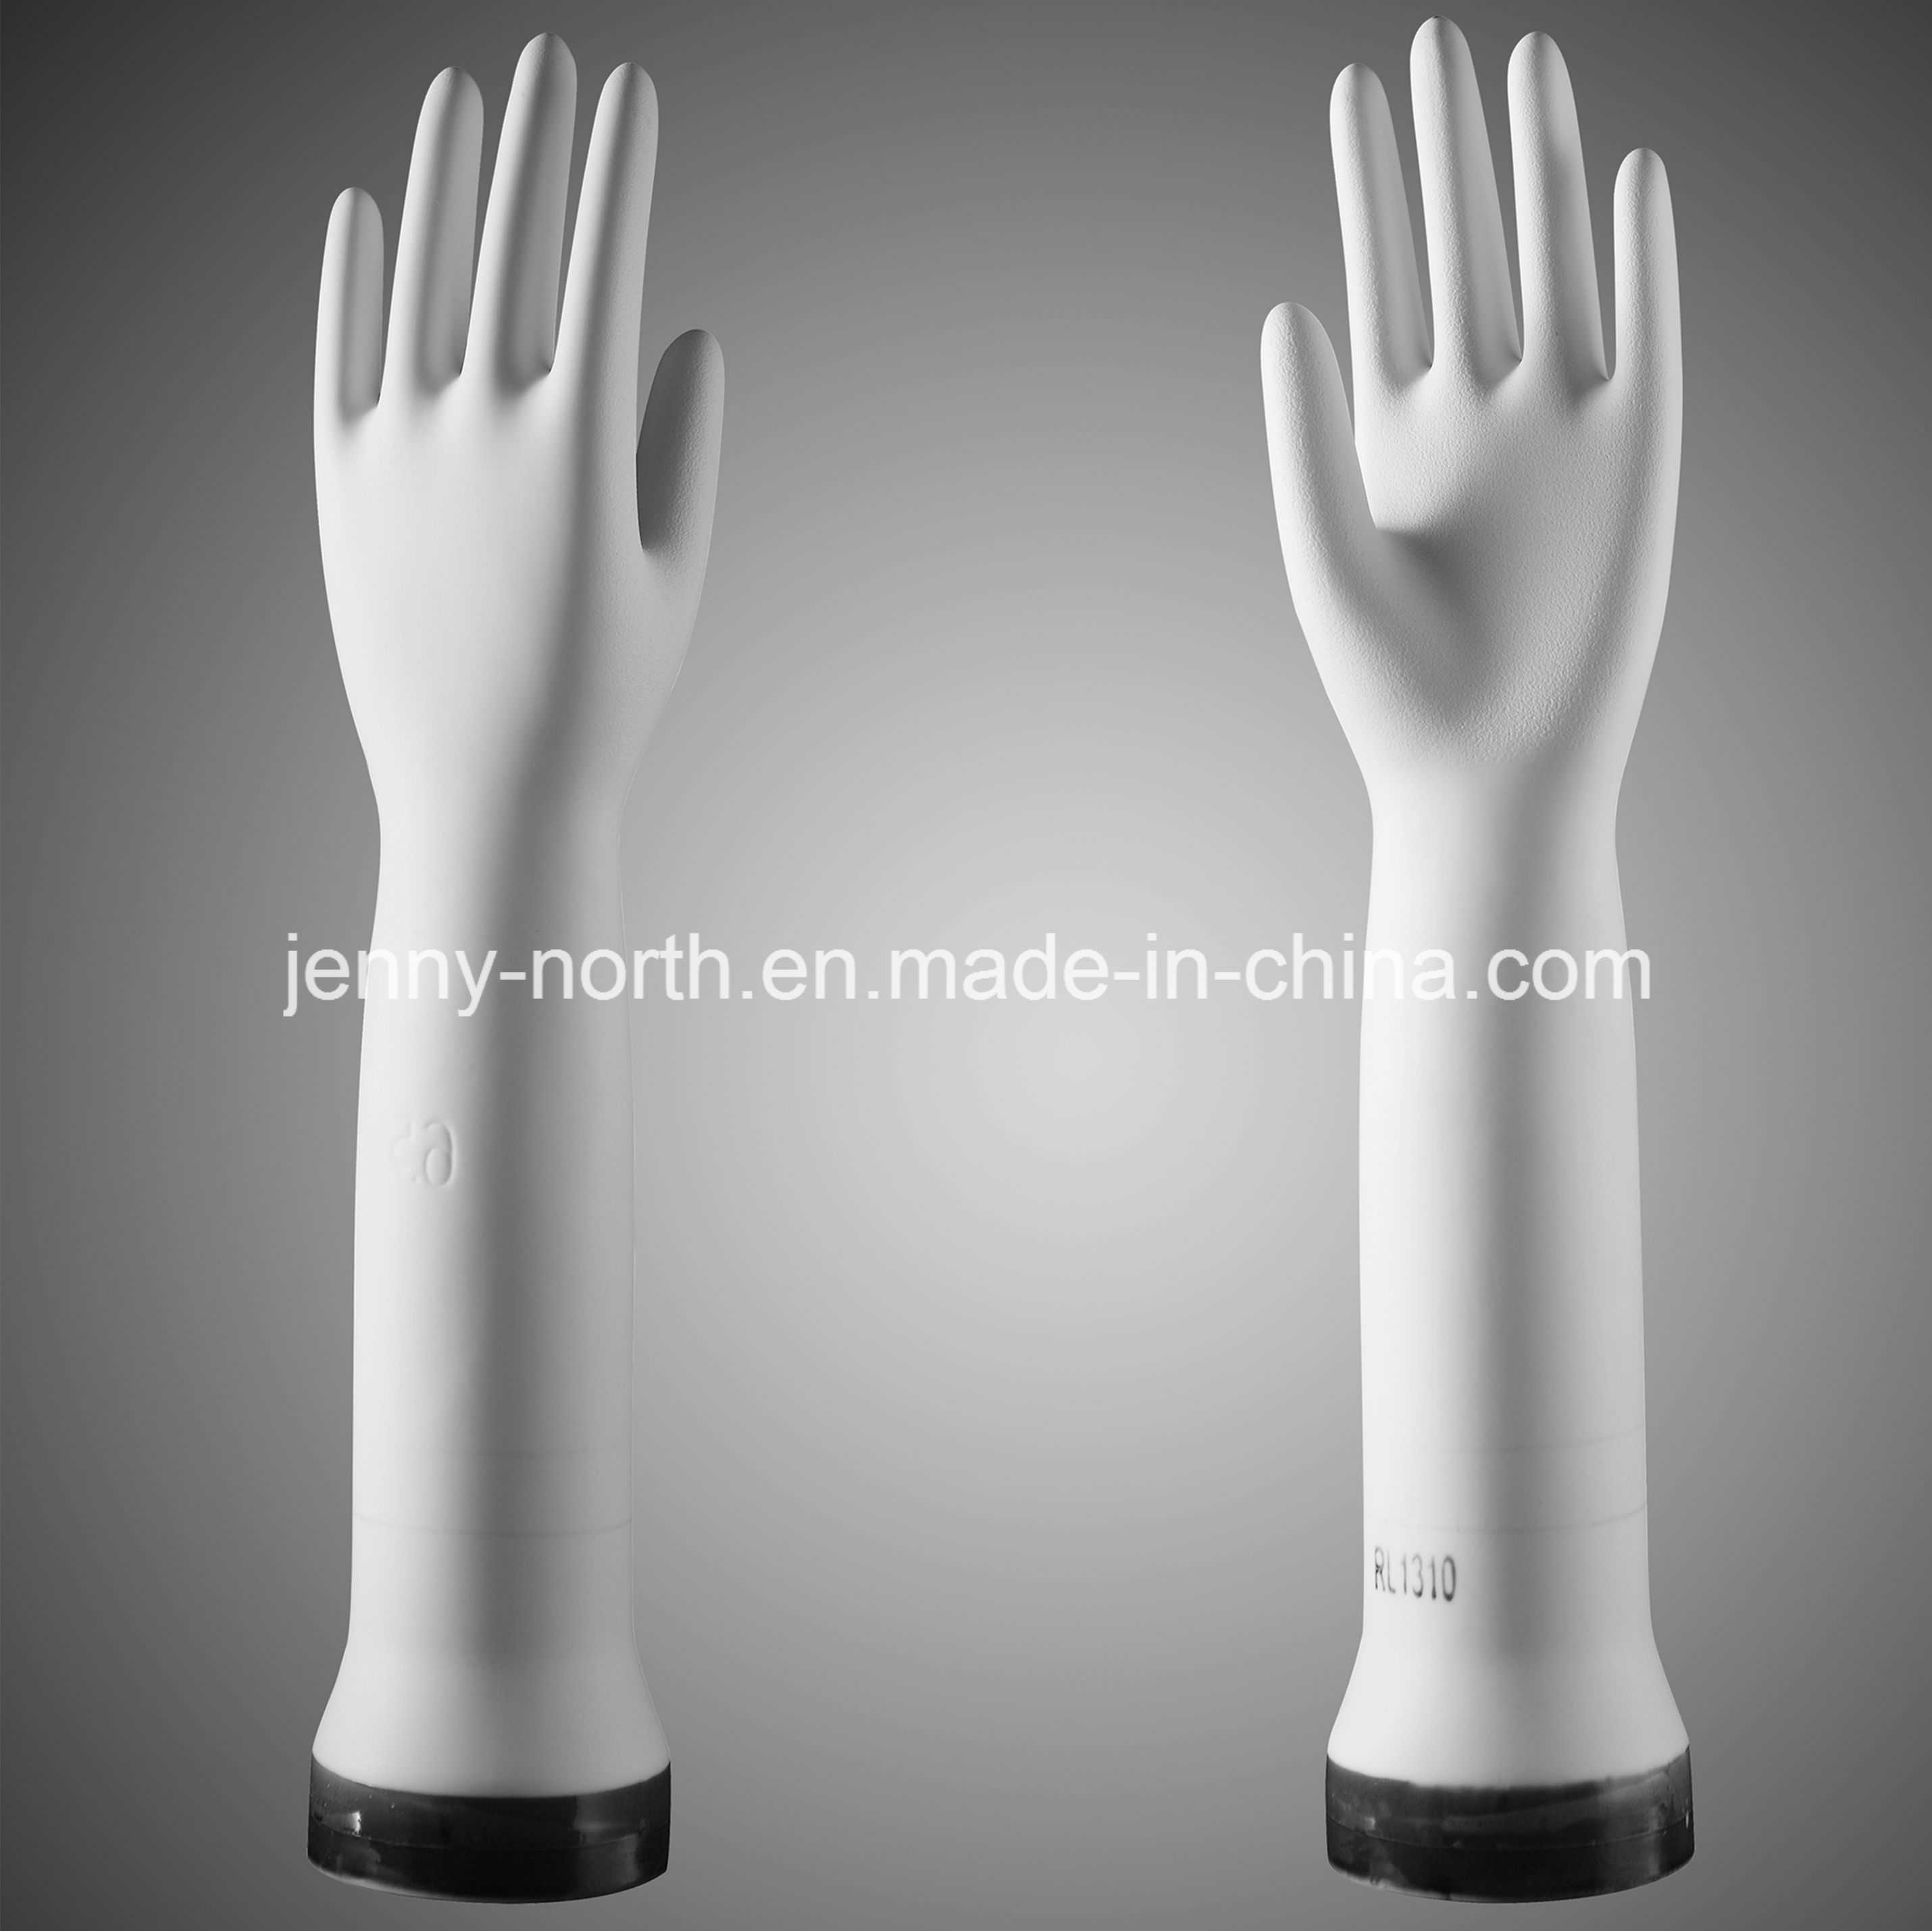 Pitted Curved Ceramic Mould for Medical Gloves